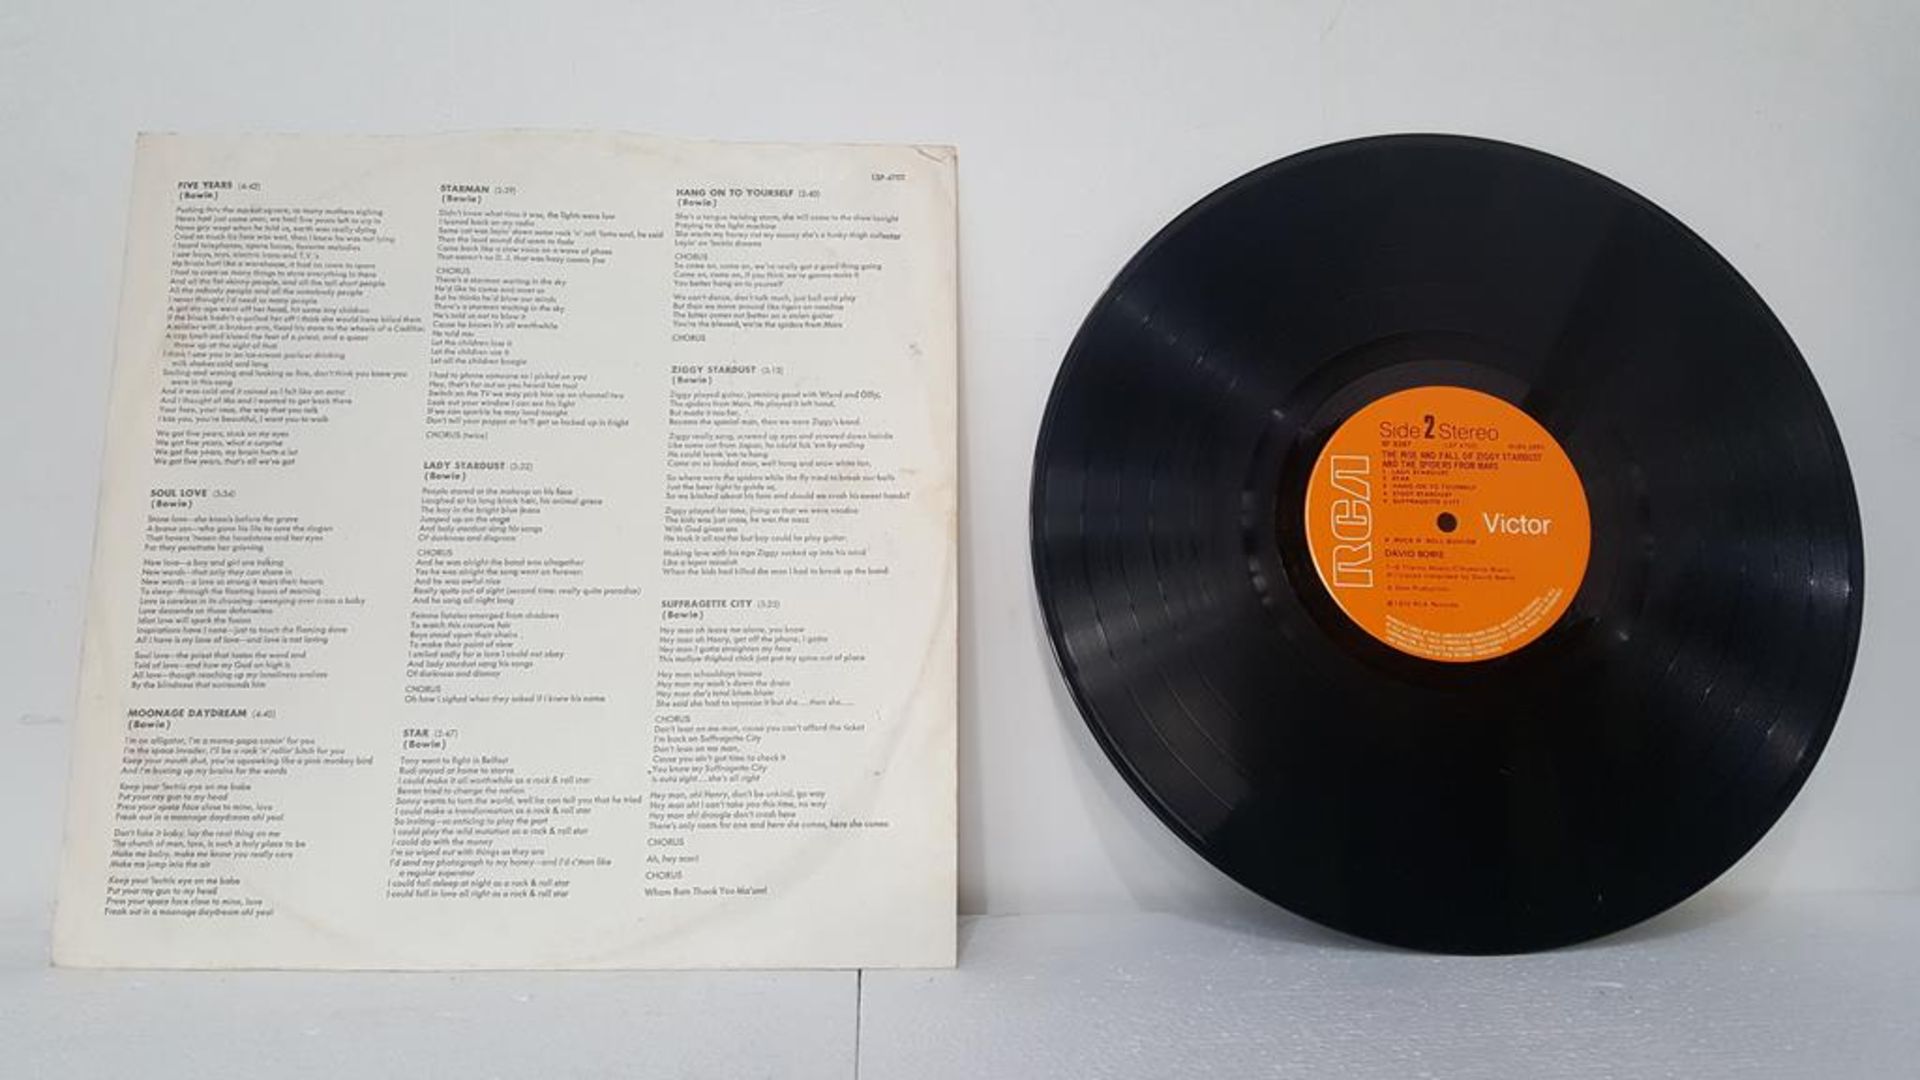 David Bowie 'The Rise and Fall of Ziggy Stardust and the Spiders from Mars' LP - Image 4 of 4